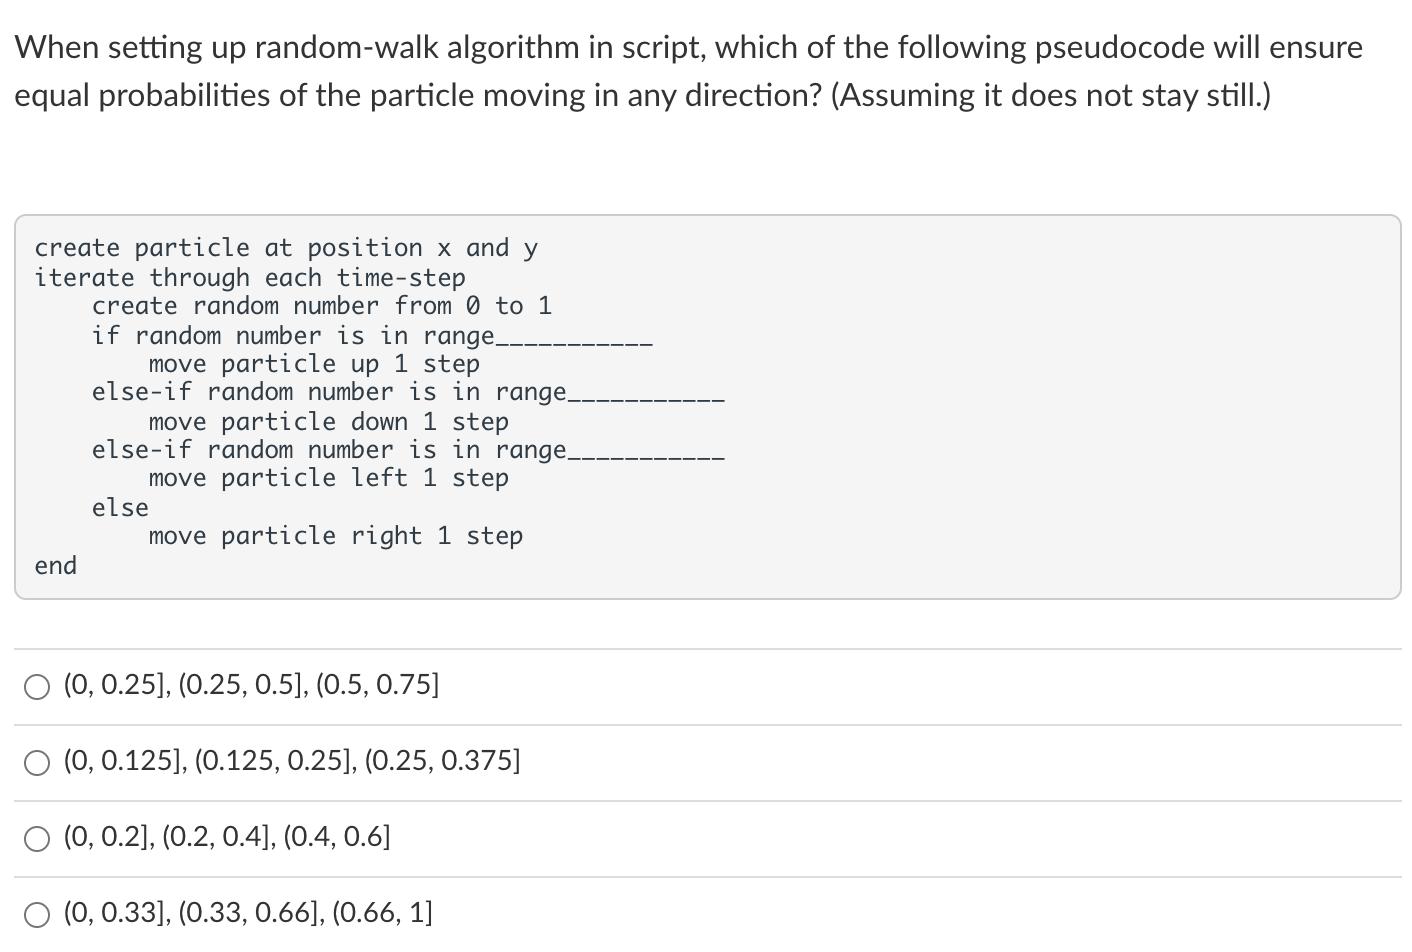 When setting up random-walk algorithm in script, which of the following pseudocode will ensure equal